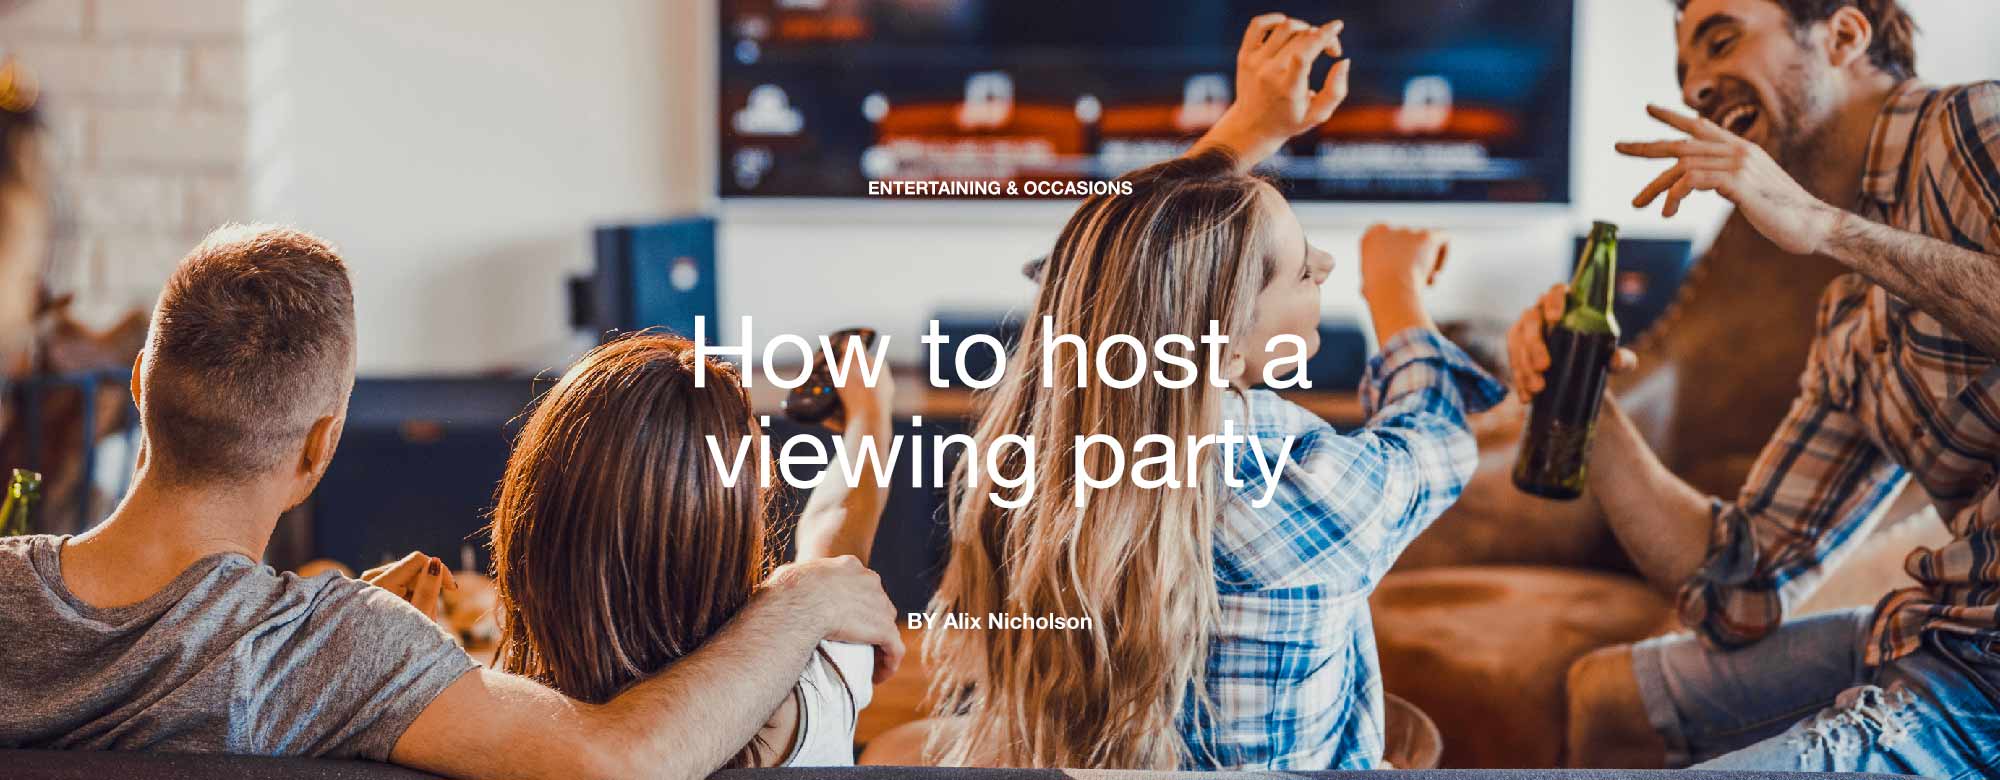 How to host a viewing party